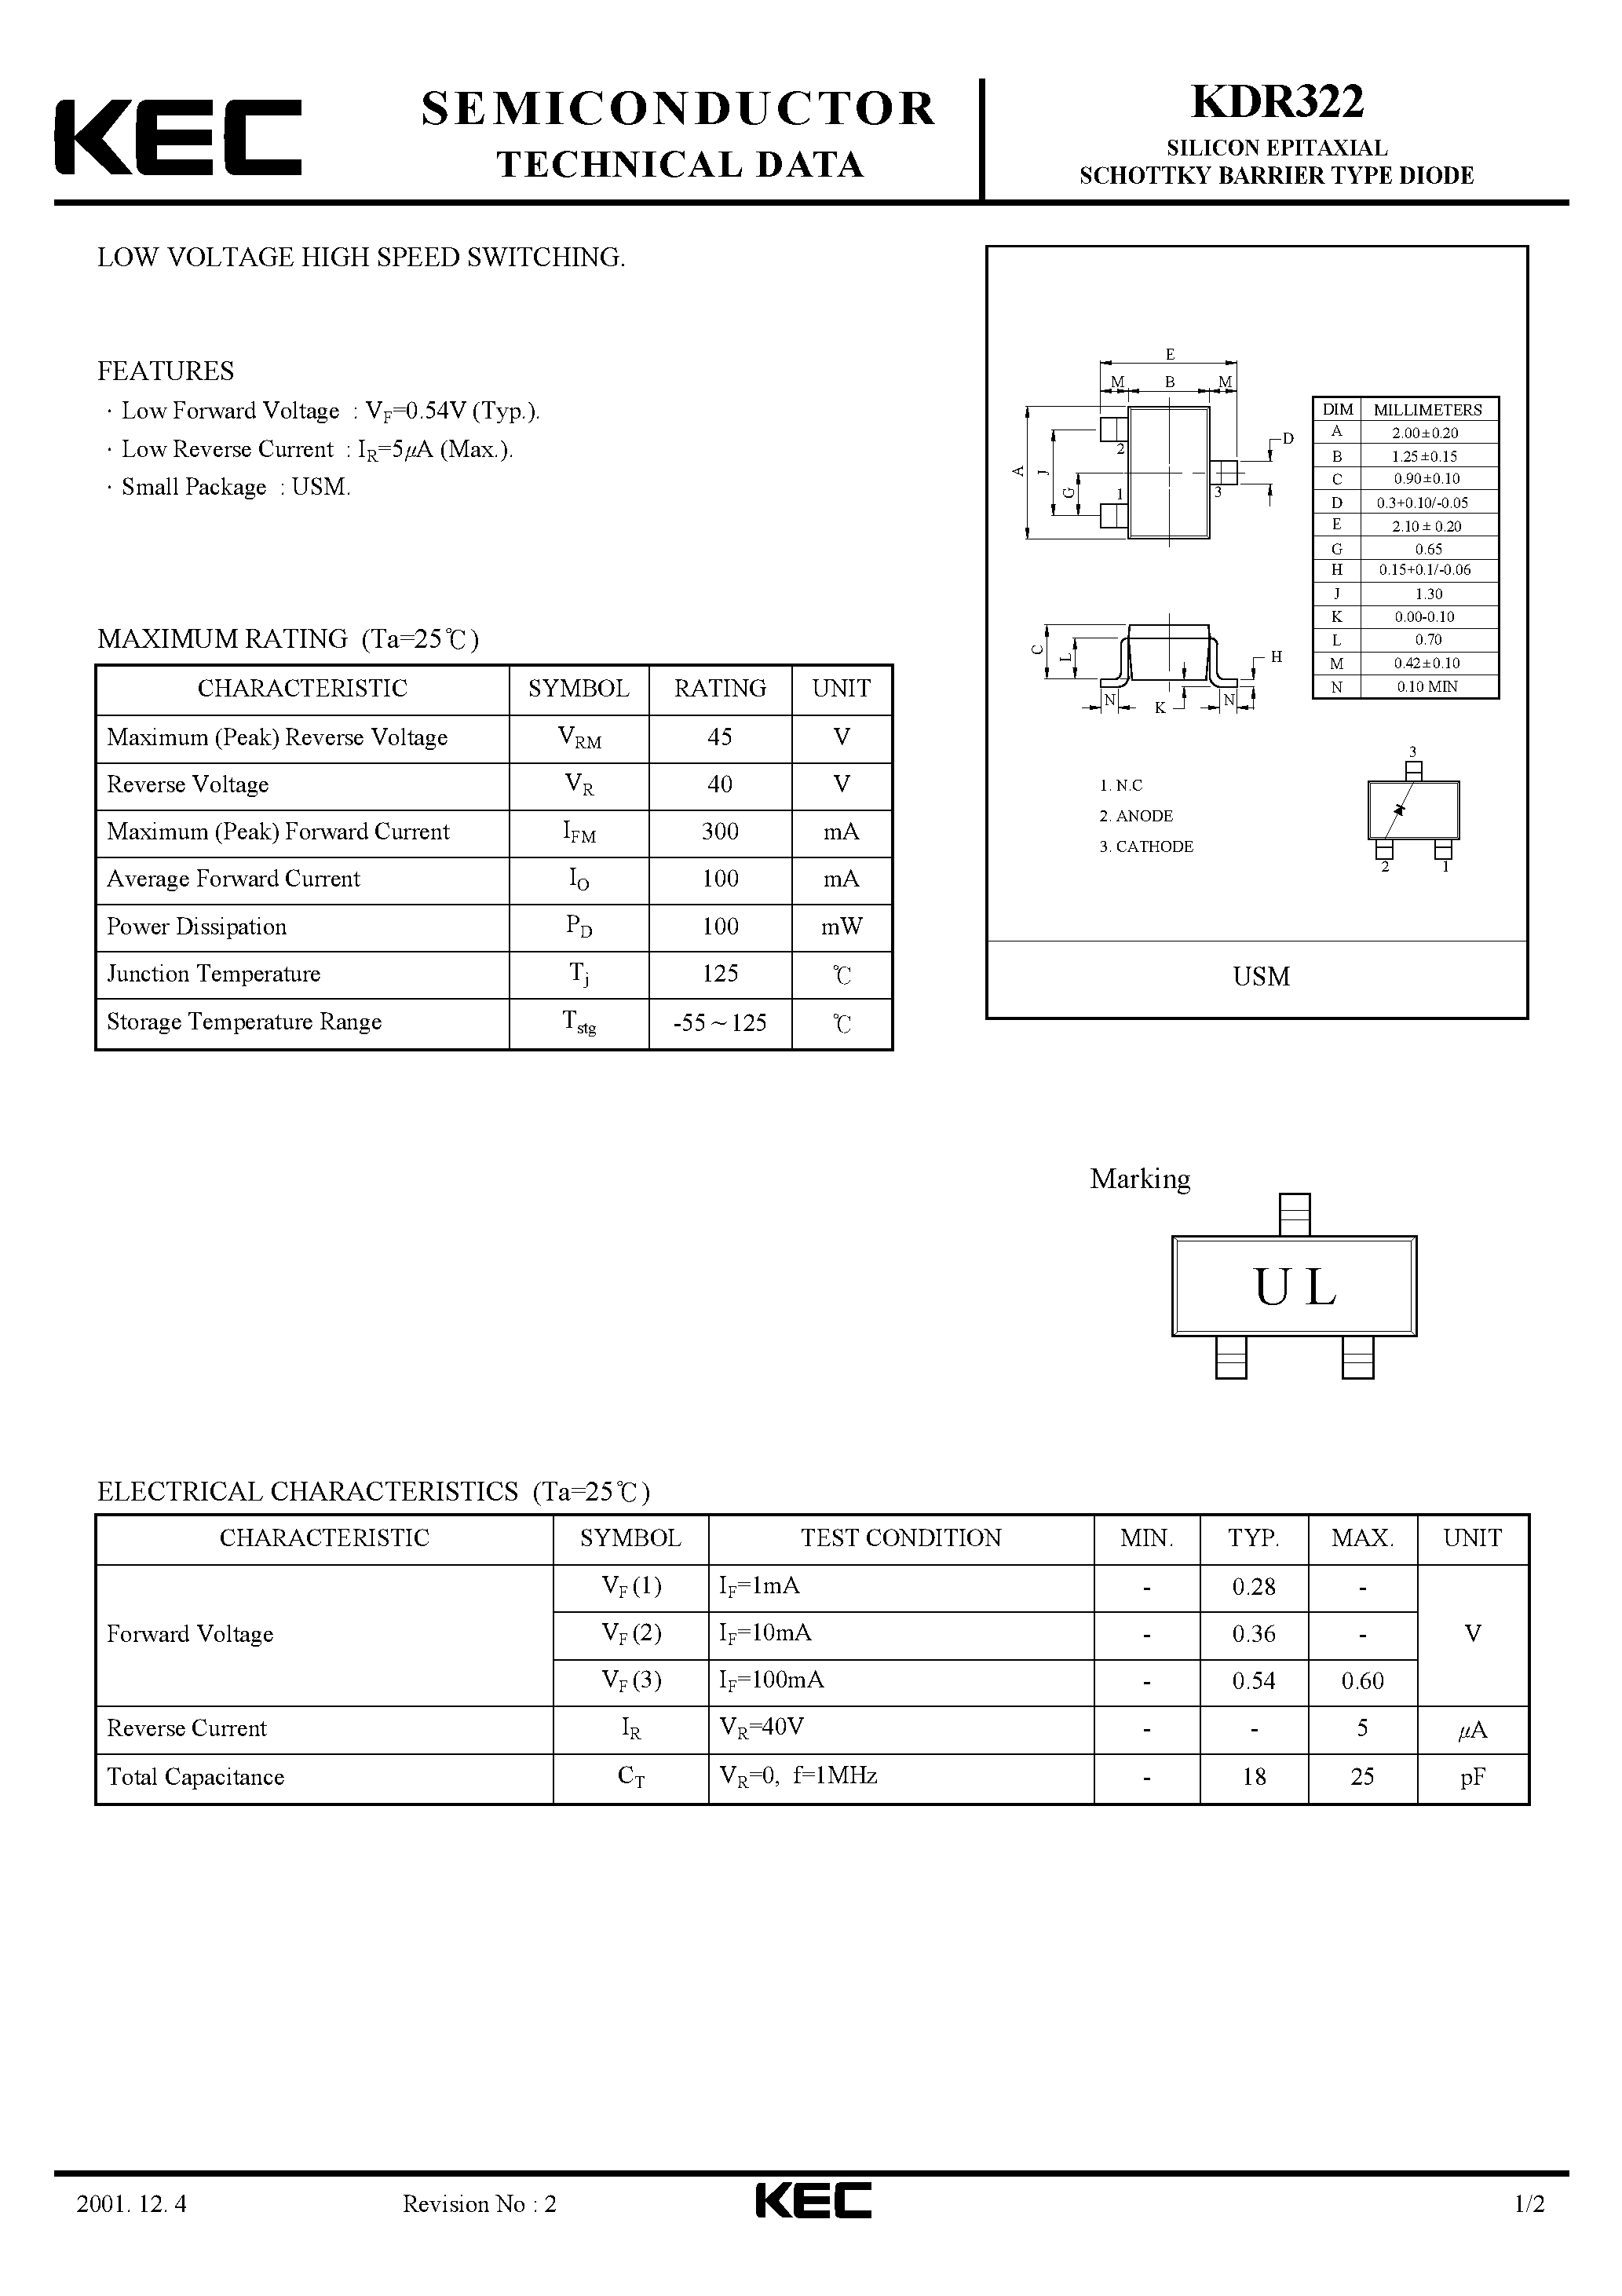 Datasheet KDR322 - SILICON EPITAXIAL SCHOTTKY BARRIER TYPE DIODE(LOW VOLTAGE HIGH SPEED SWITCHING) page 1